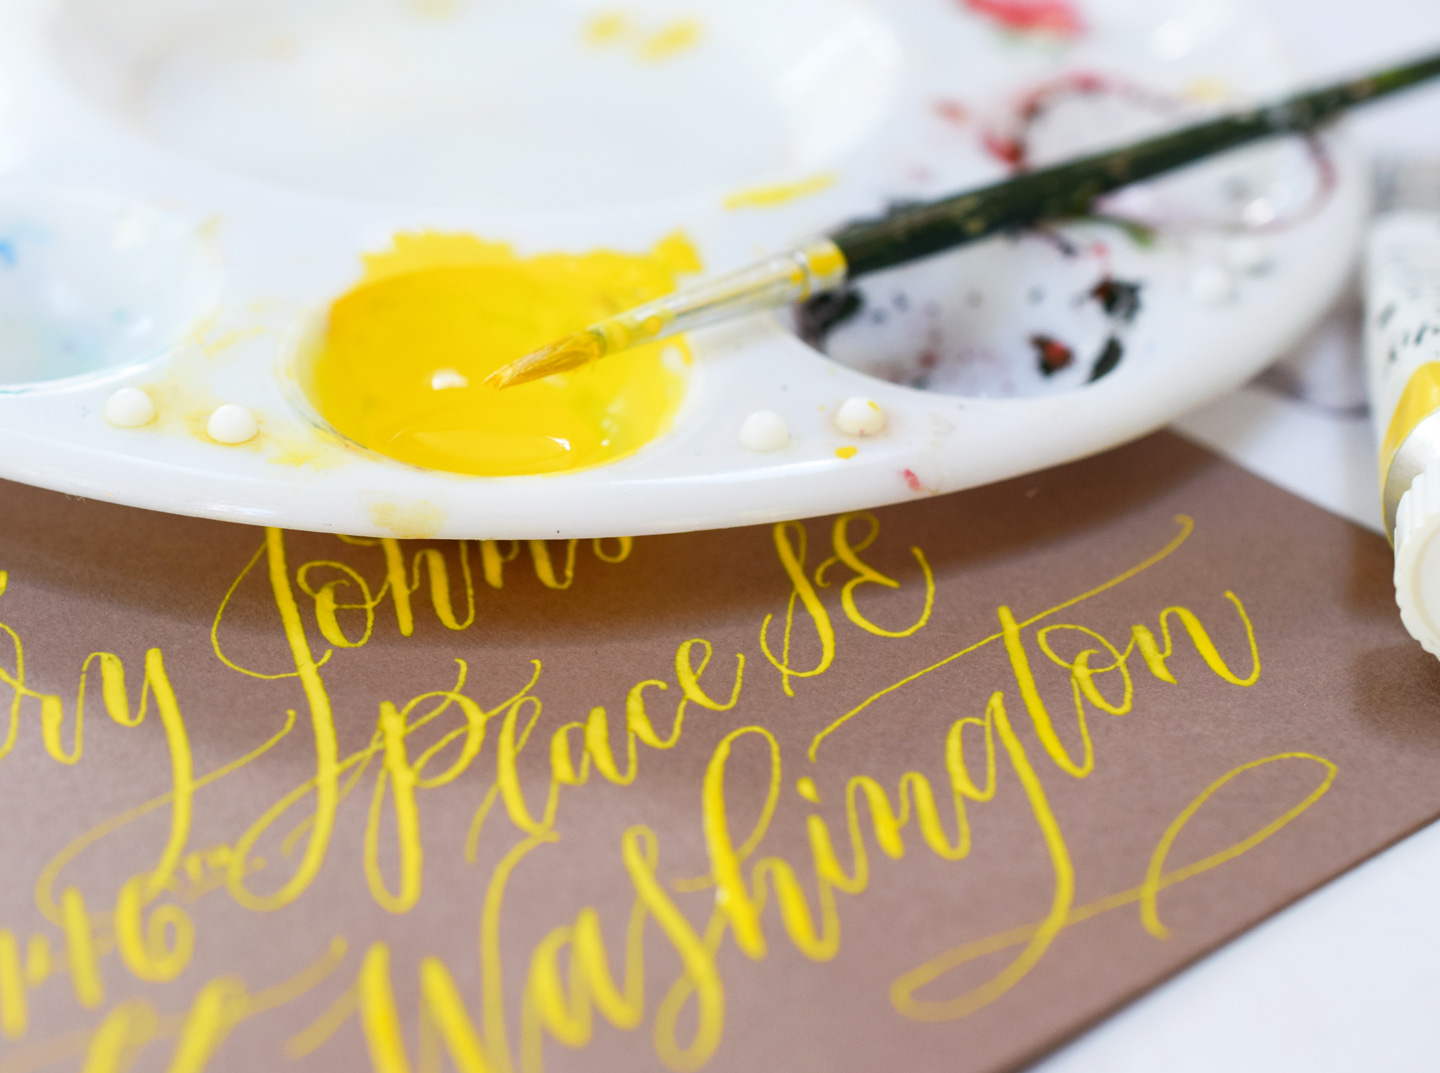 How to Use Gouache for Calligraphy